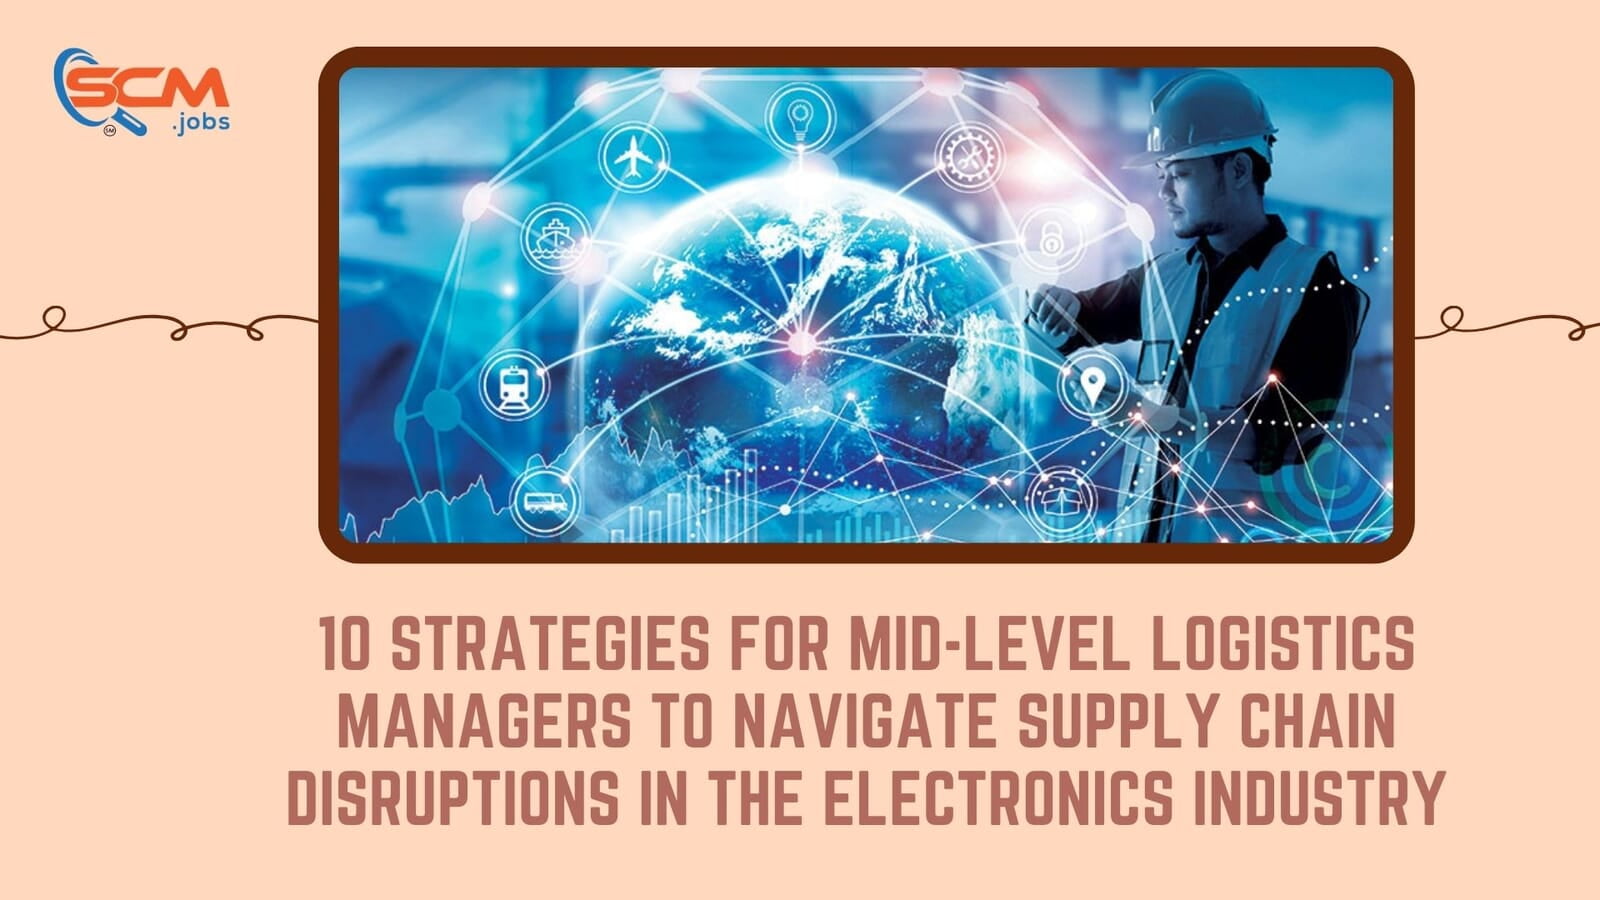 10 Strategies for Mid-Level Logistics Managers to Navigate Supply Chain Disruptions in the Electronics Industry